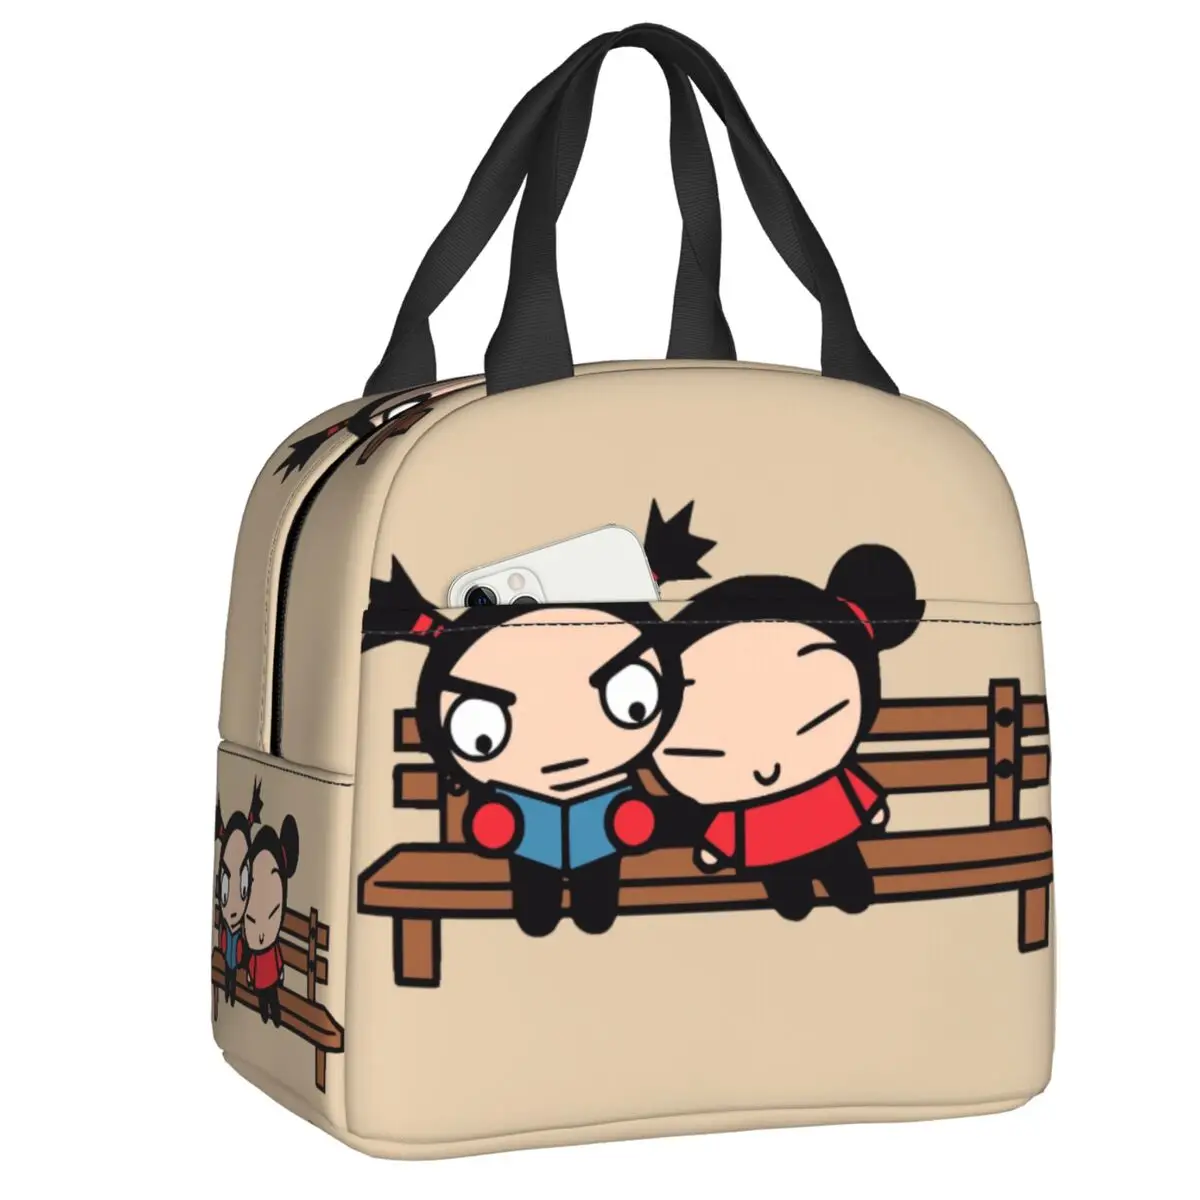 

Cartoon Anime Pucca Lunch Bag Leakproof Thermal Cooler Insulated Lunch Tote Box for Women School Picnic Travel Food Bags